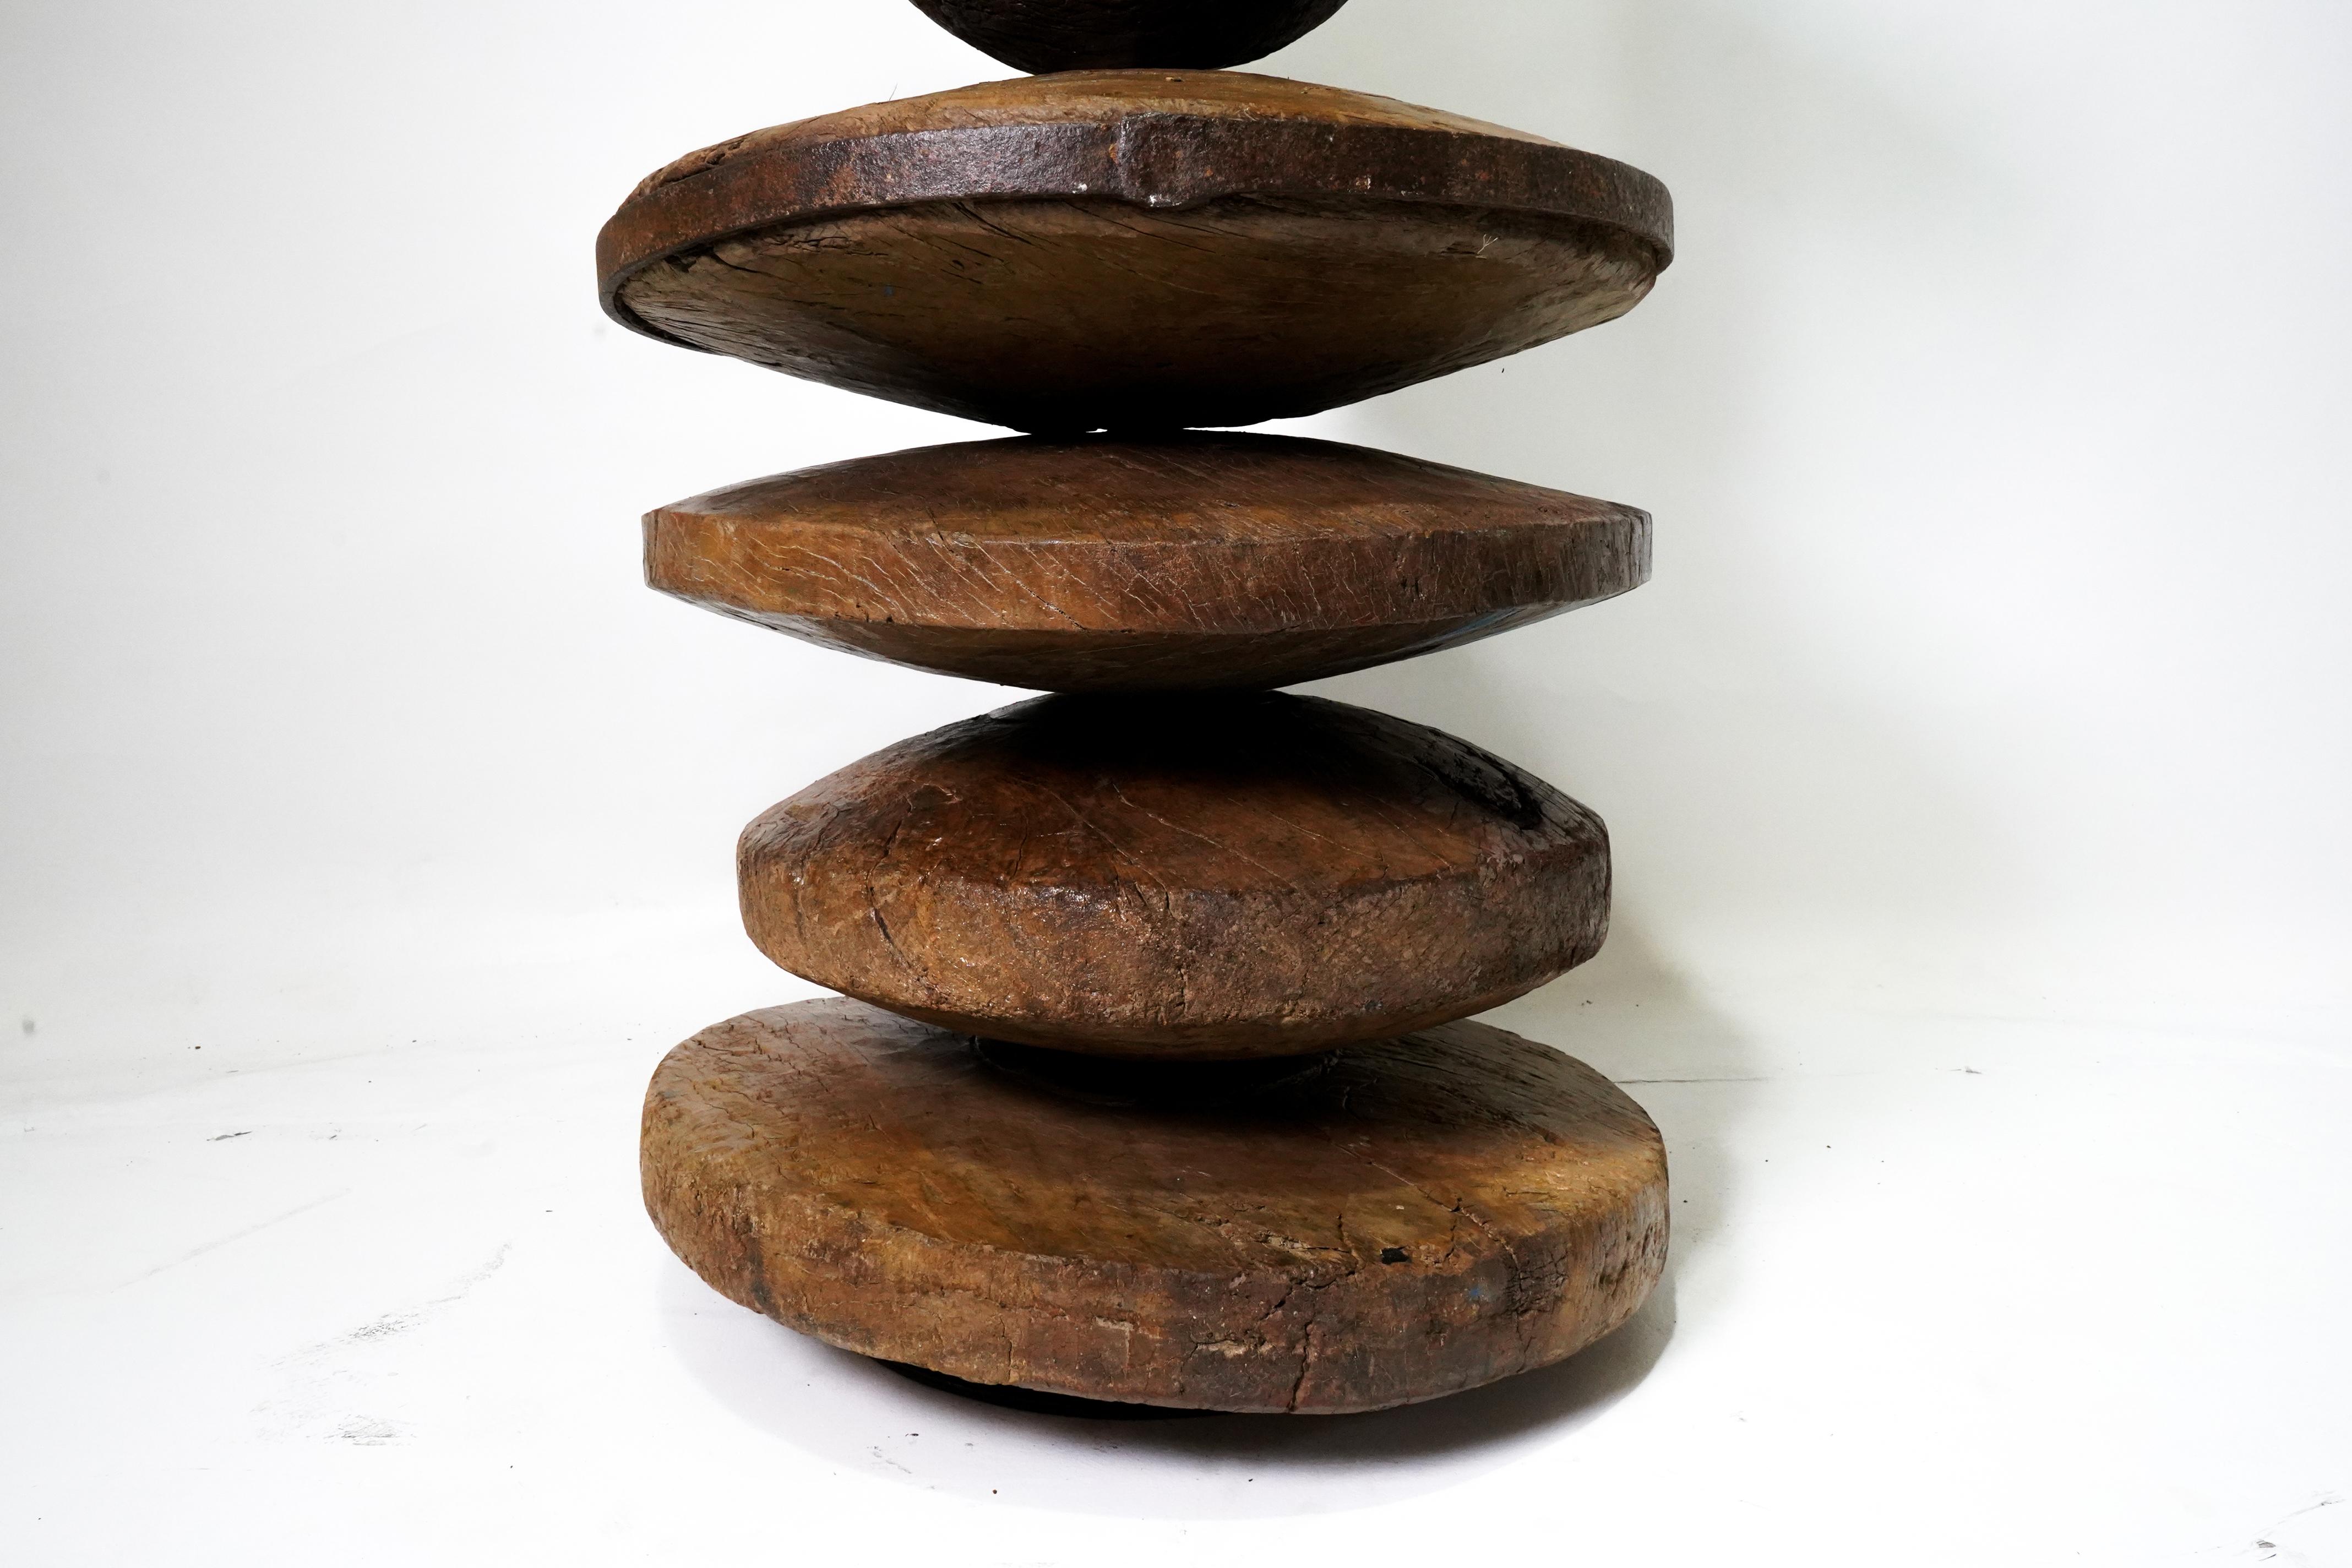 Monumental Modern Sculpture Assembled From Ancient Wooden Wheels and Pulleys 3